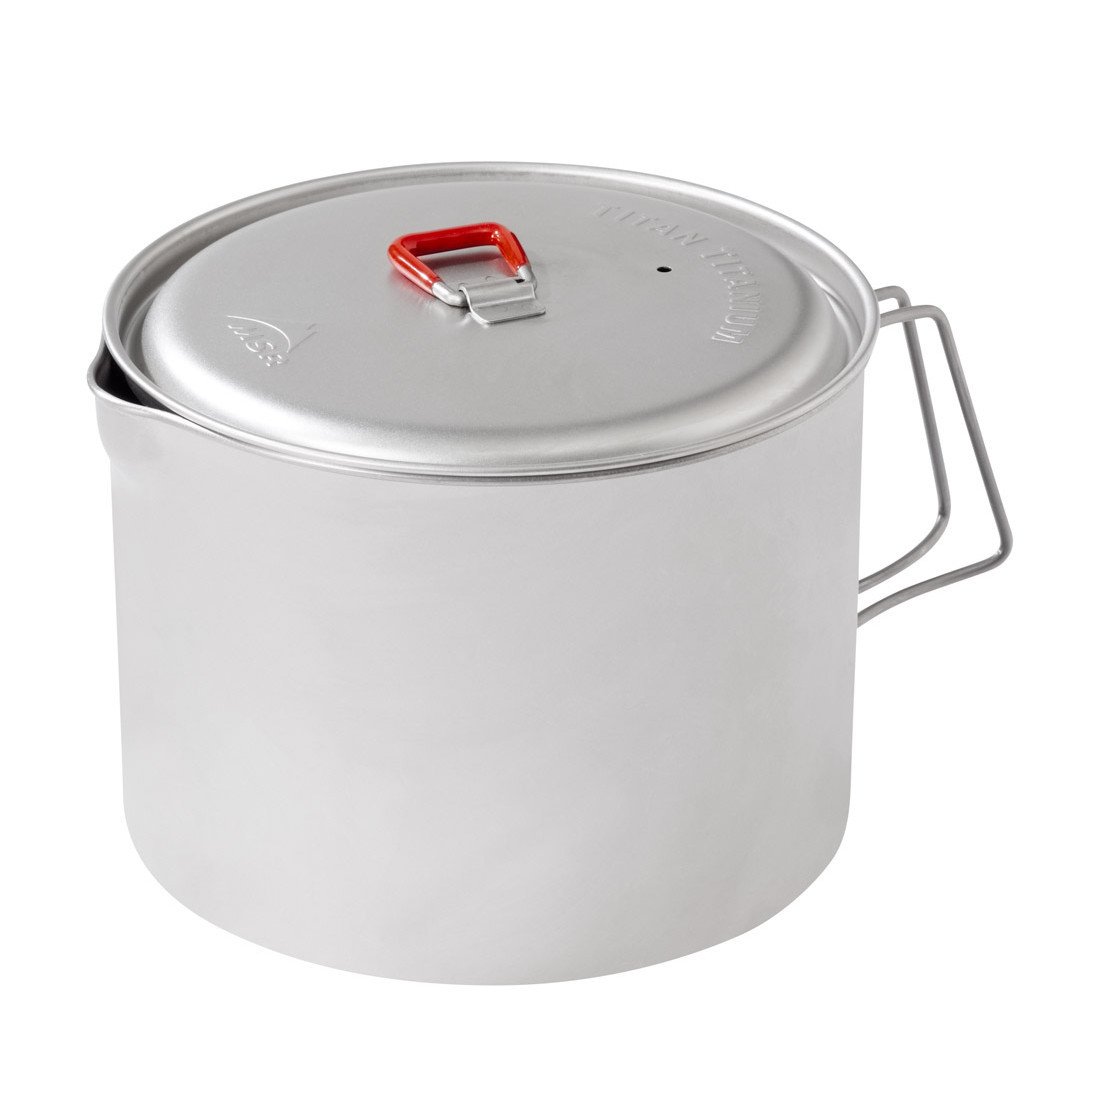 MSR Big Titan Kettle, camping cookware in silver colour